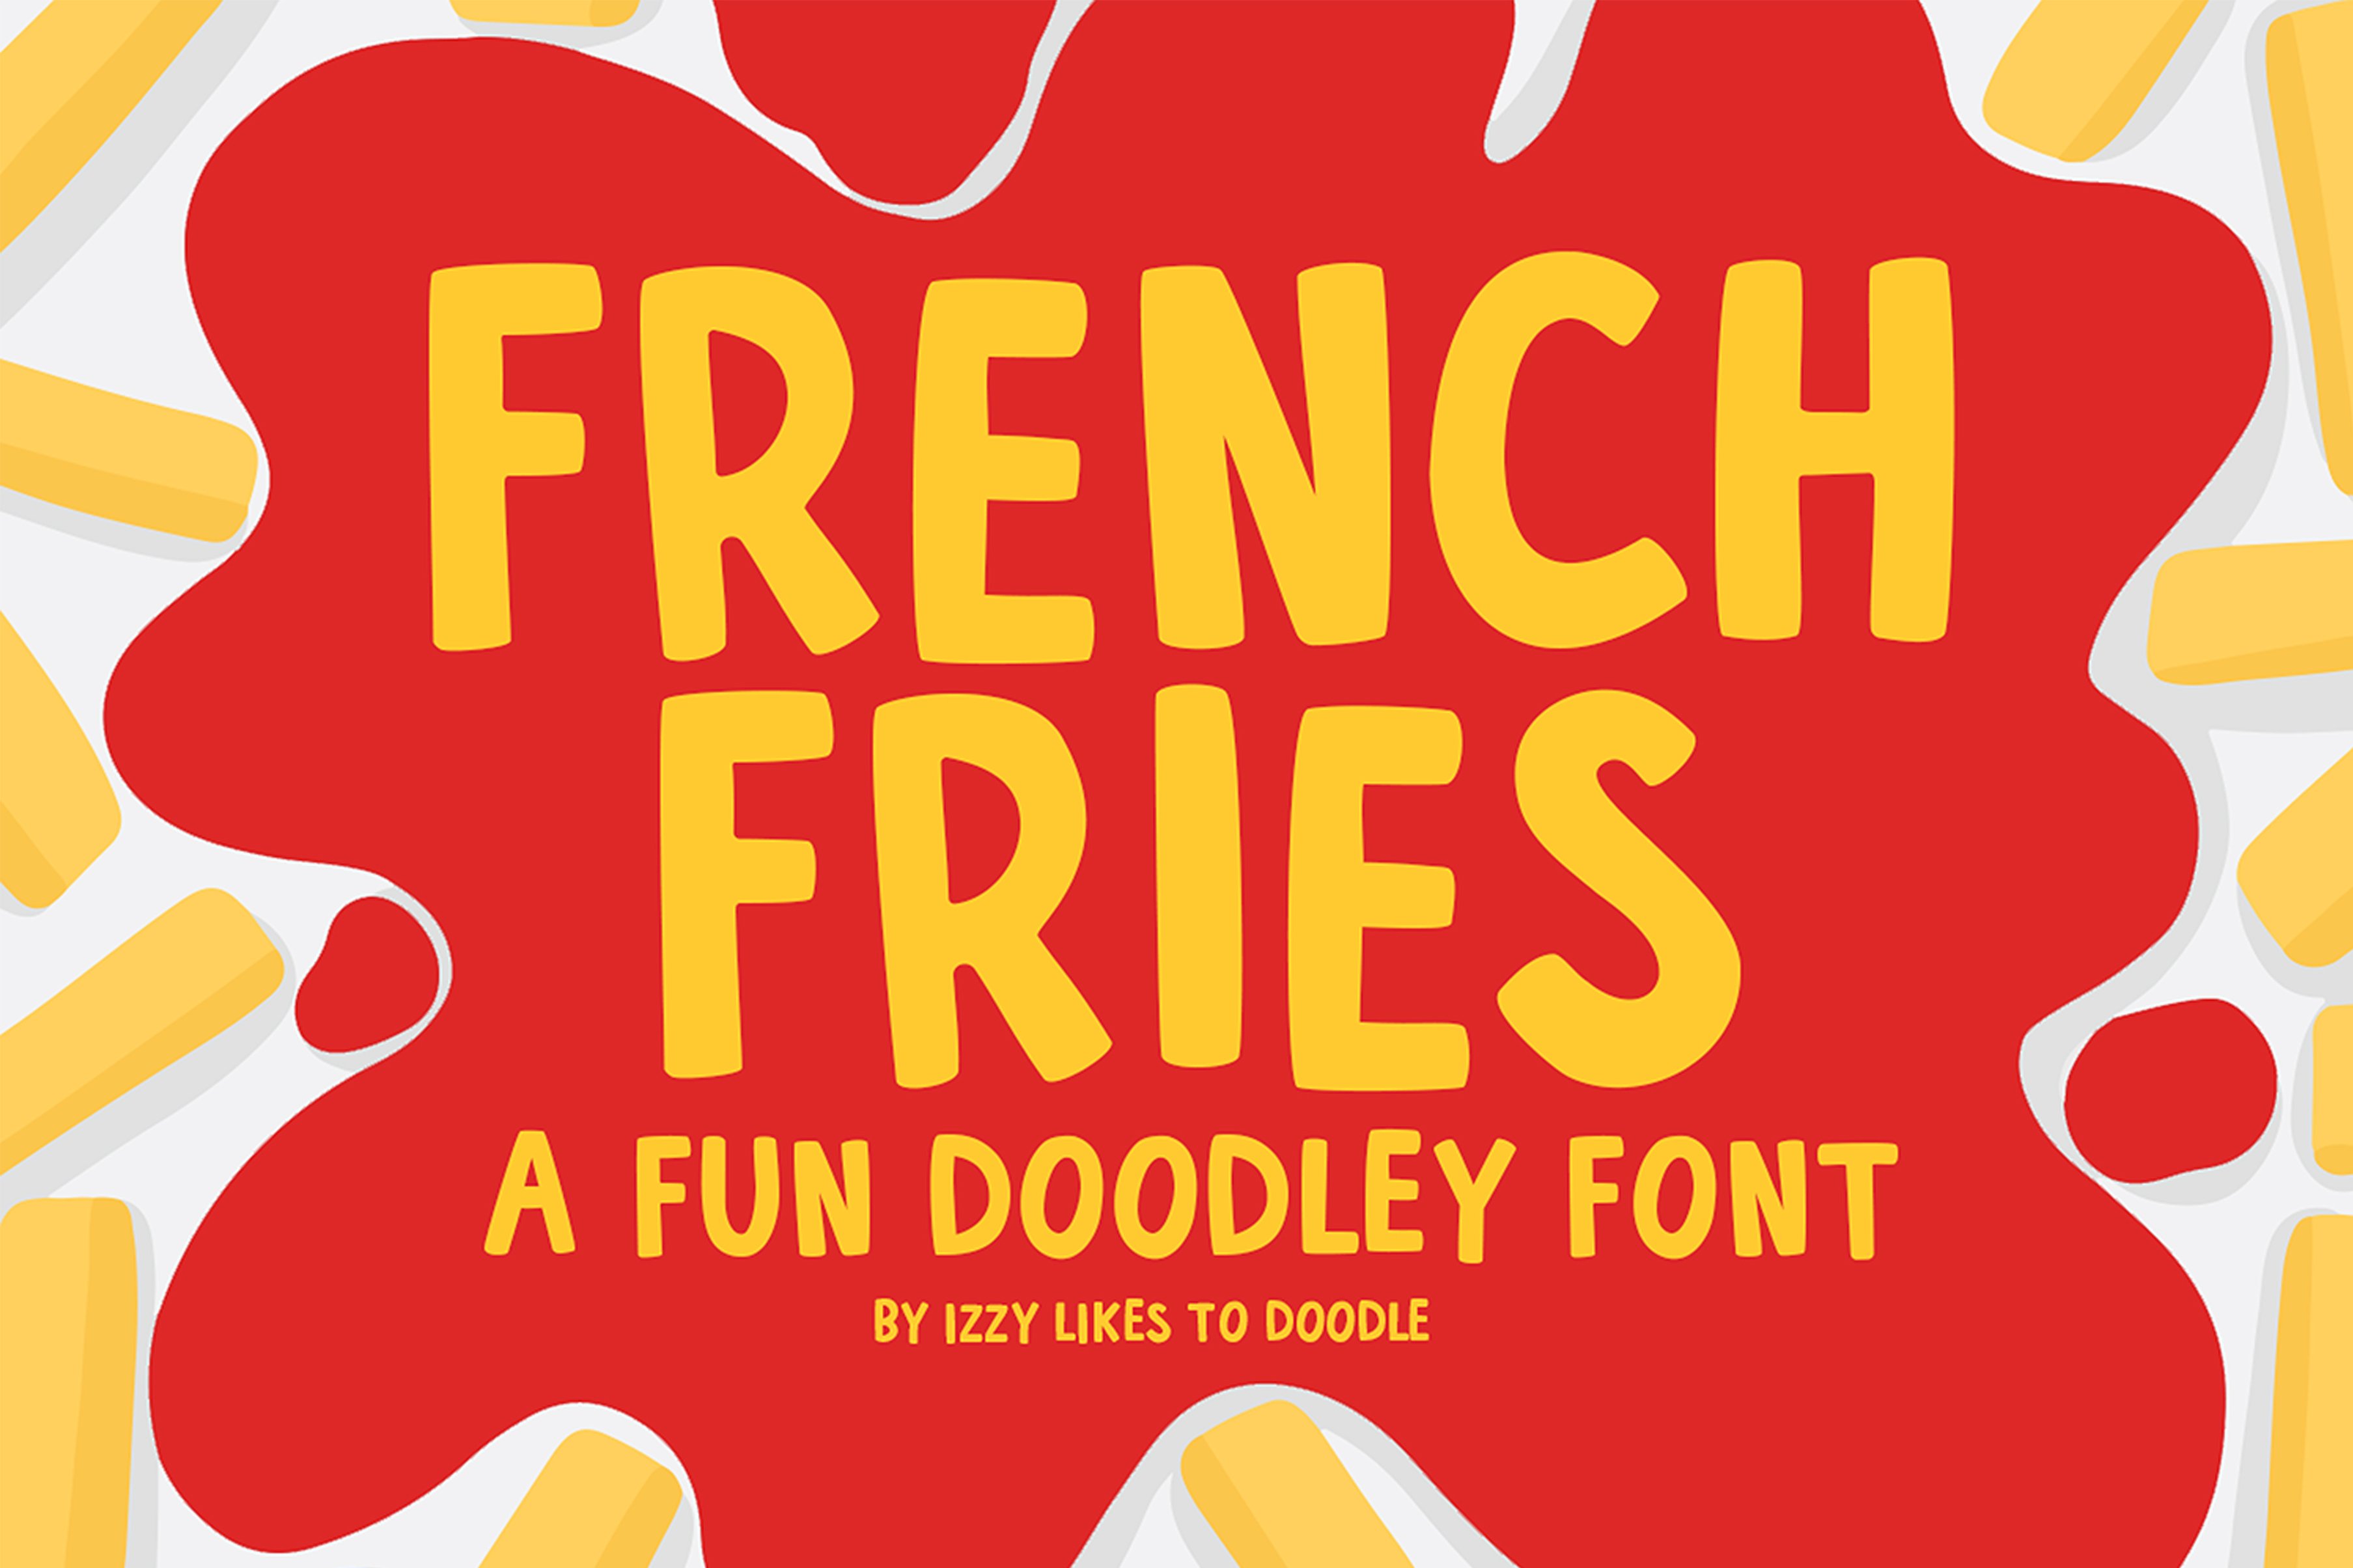 French Fries - A Fun Doodley Font cover image.